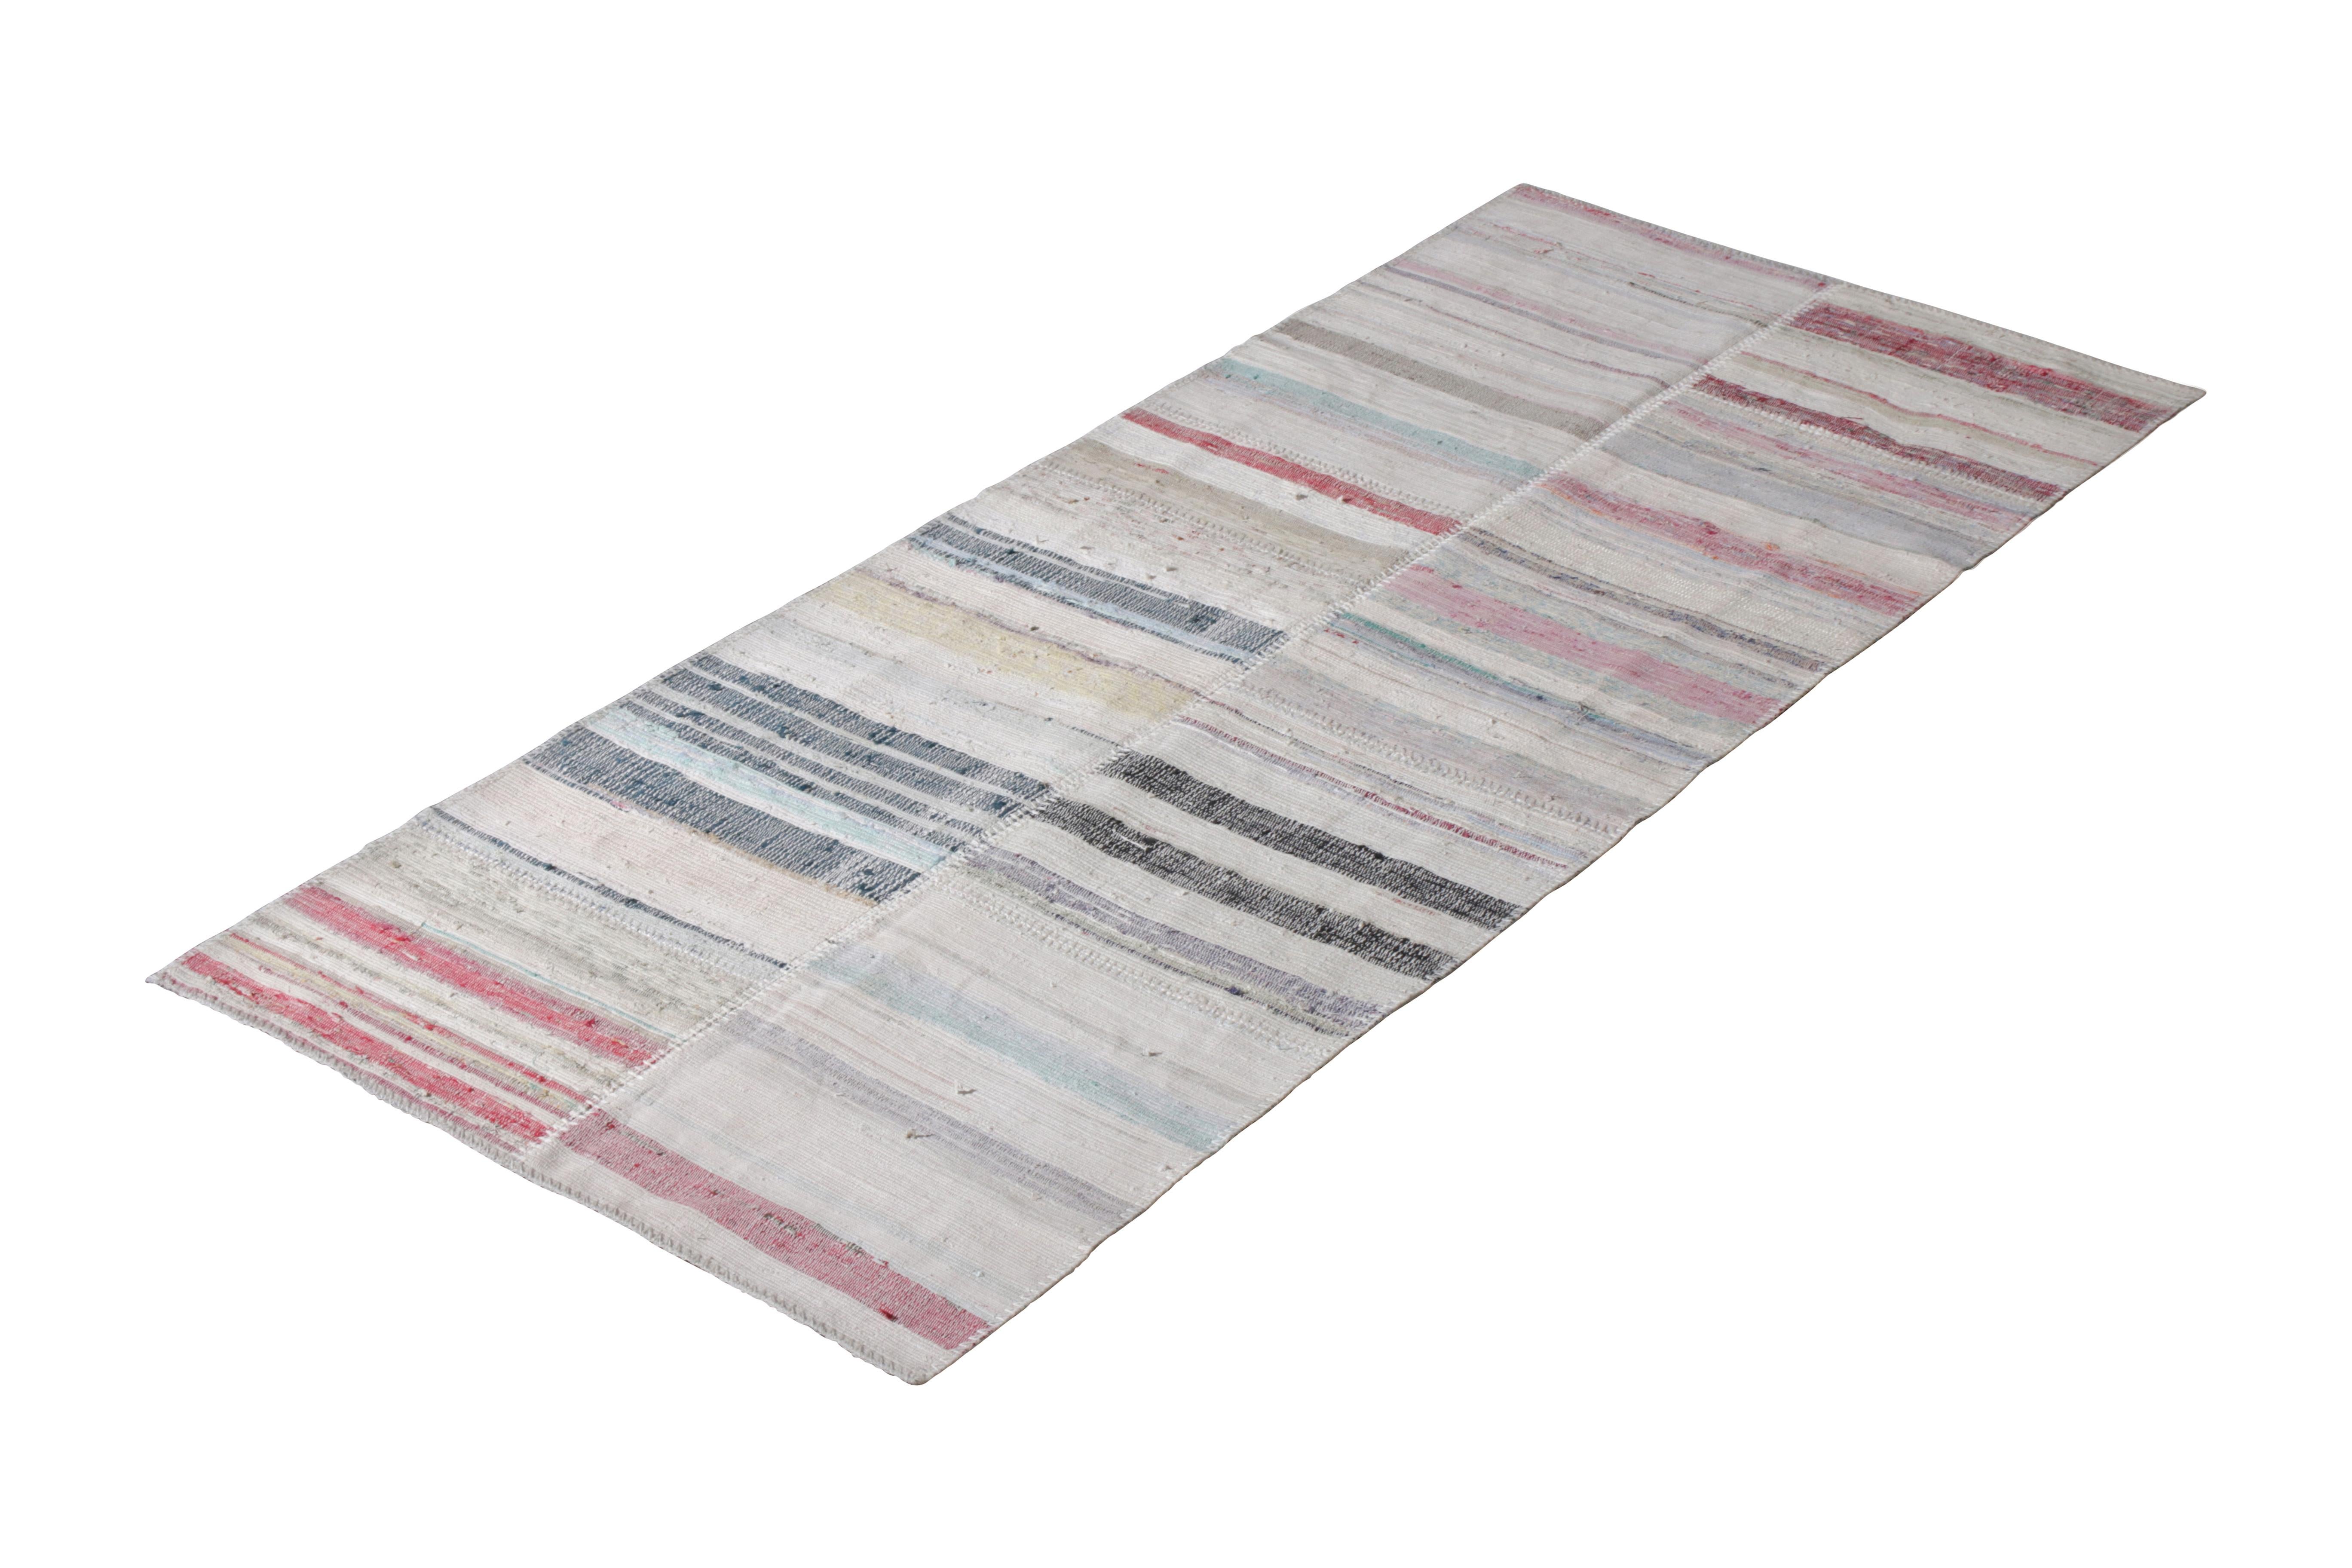 Handwoven in a wool flat-weave utilizing vintage yarns, this modern Kilim runner from Rug & Kilim’s Patchwork Kilim rug collection marries inspiration from midcentury Kilim rugs with a whimsical spectrum of red, blue, pink, green, and other